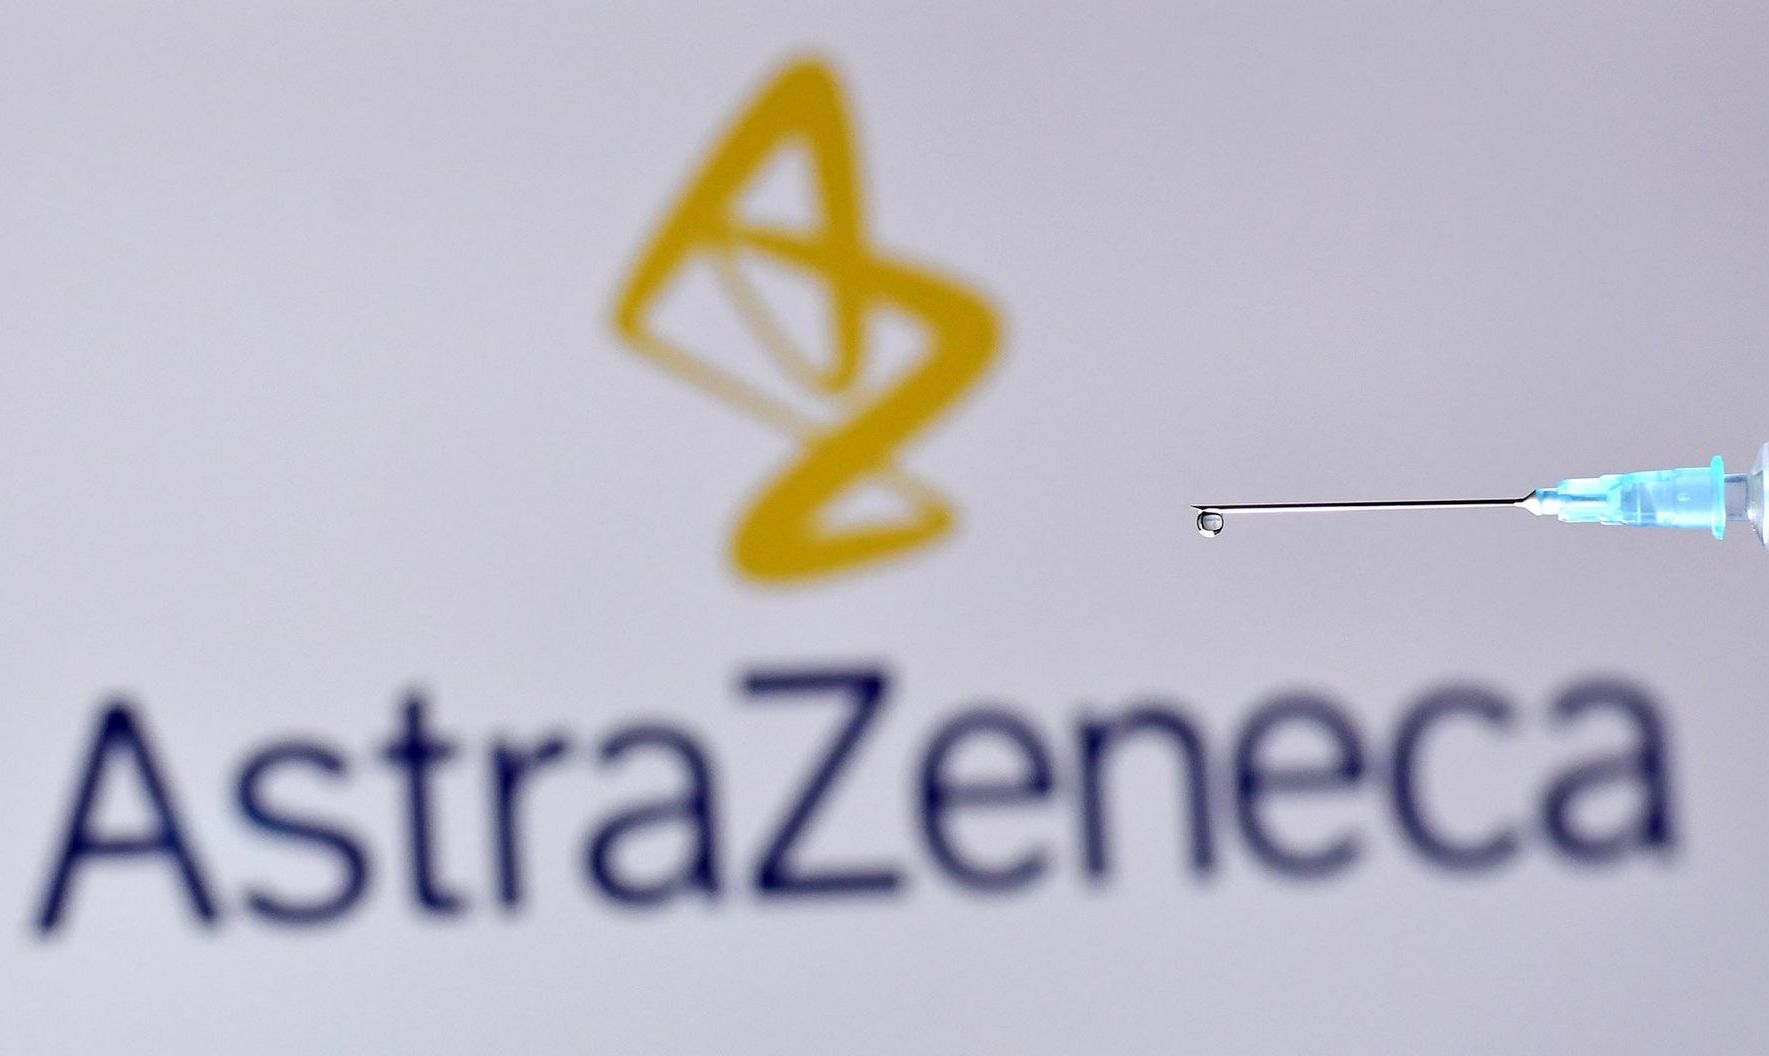 The benefits outweigh the risks: Europe resumes AstraZeneca vaccination